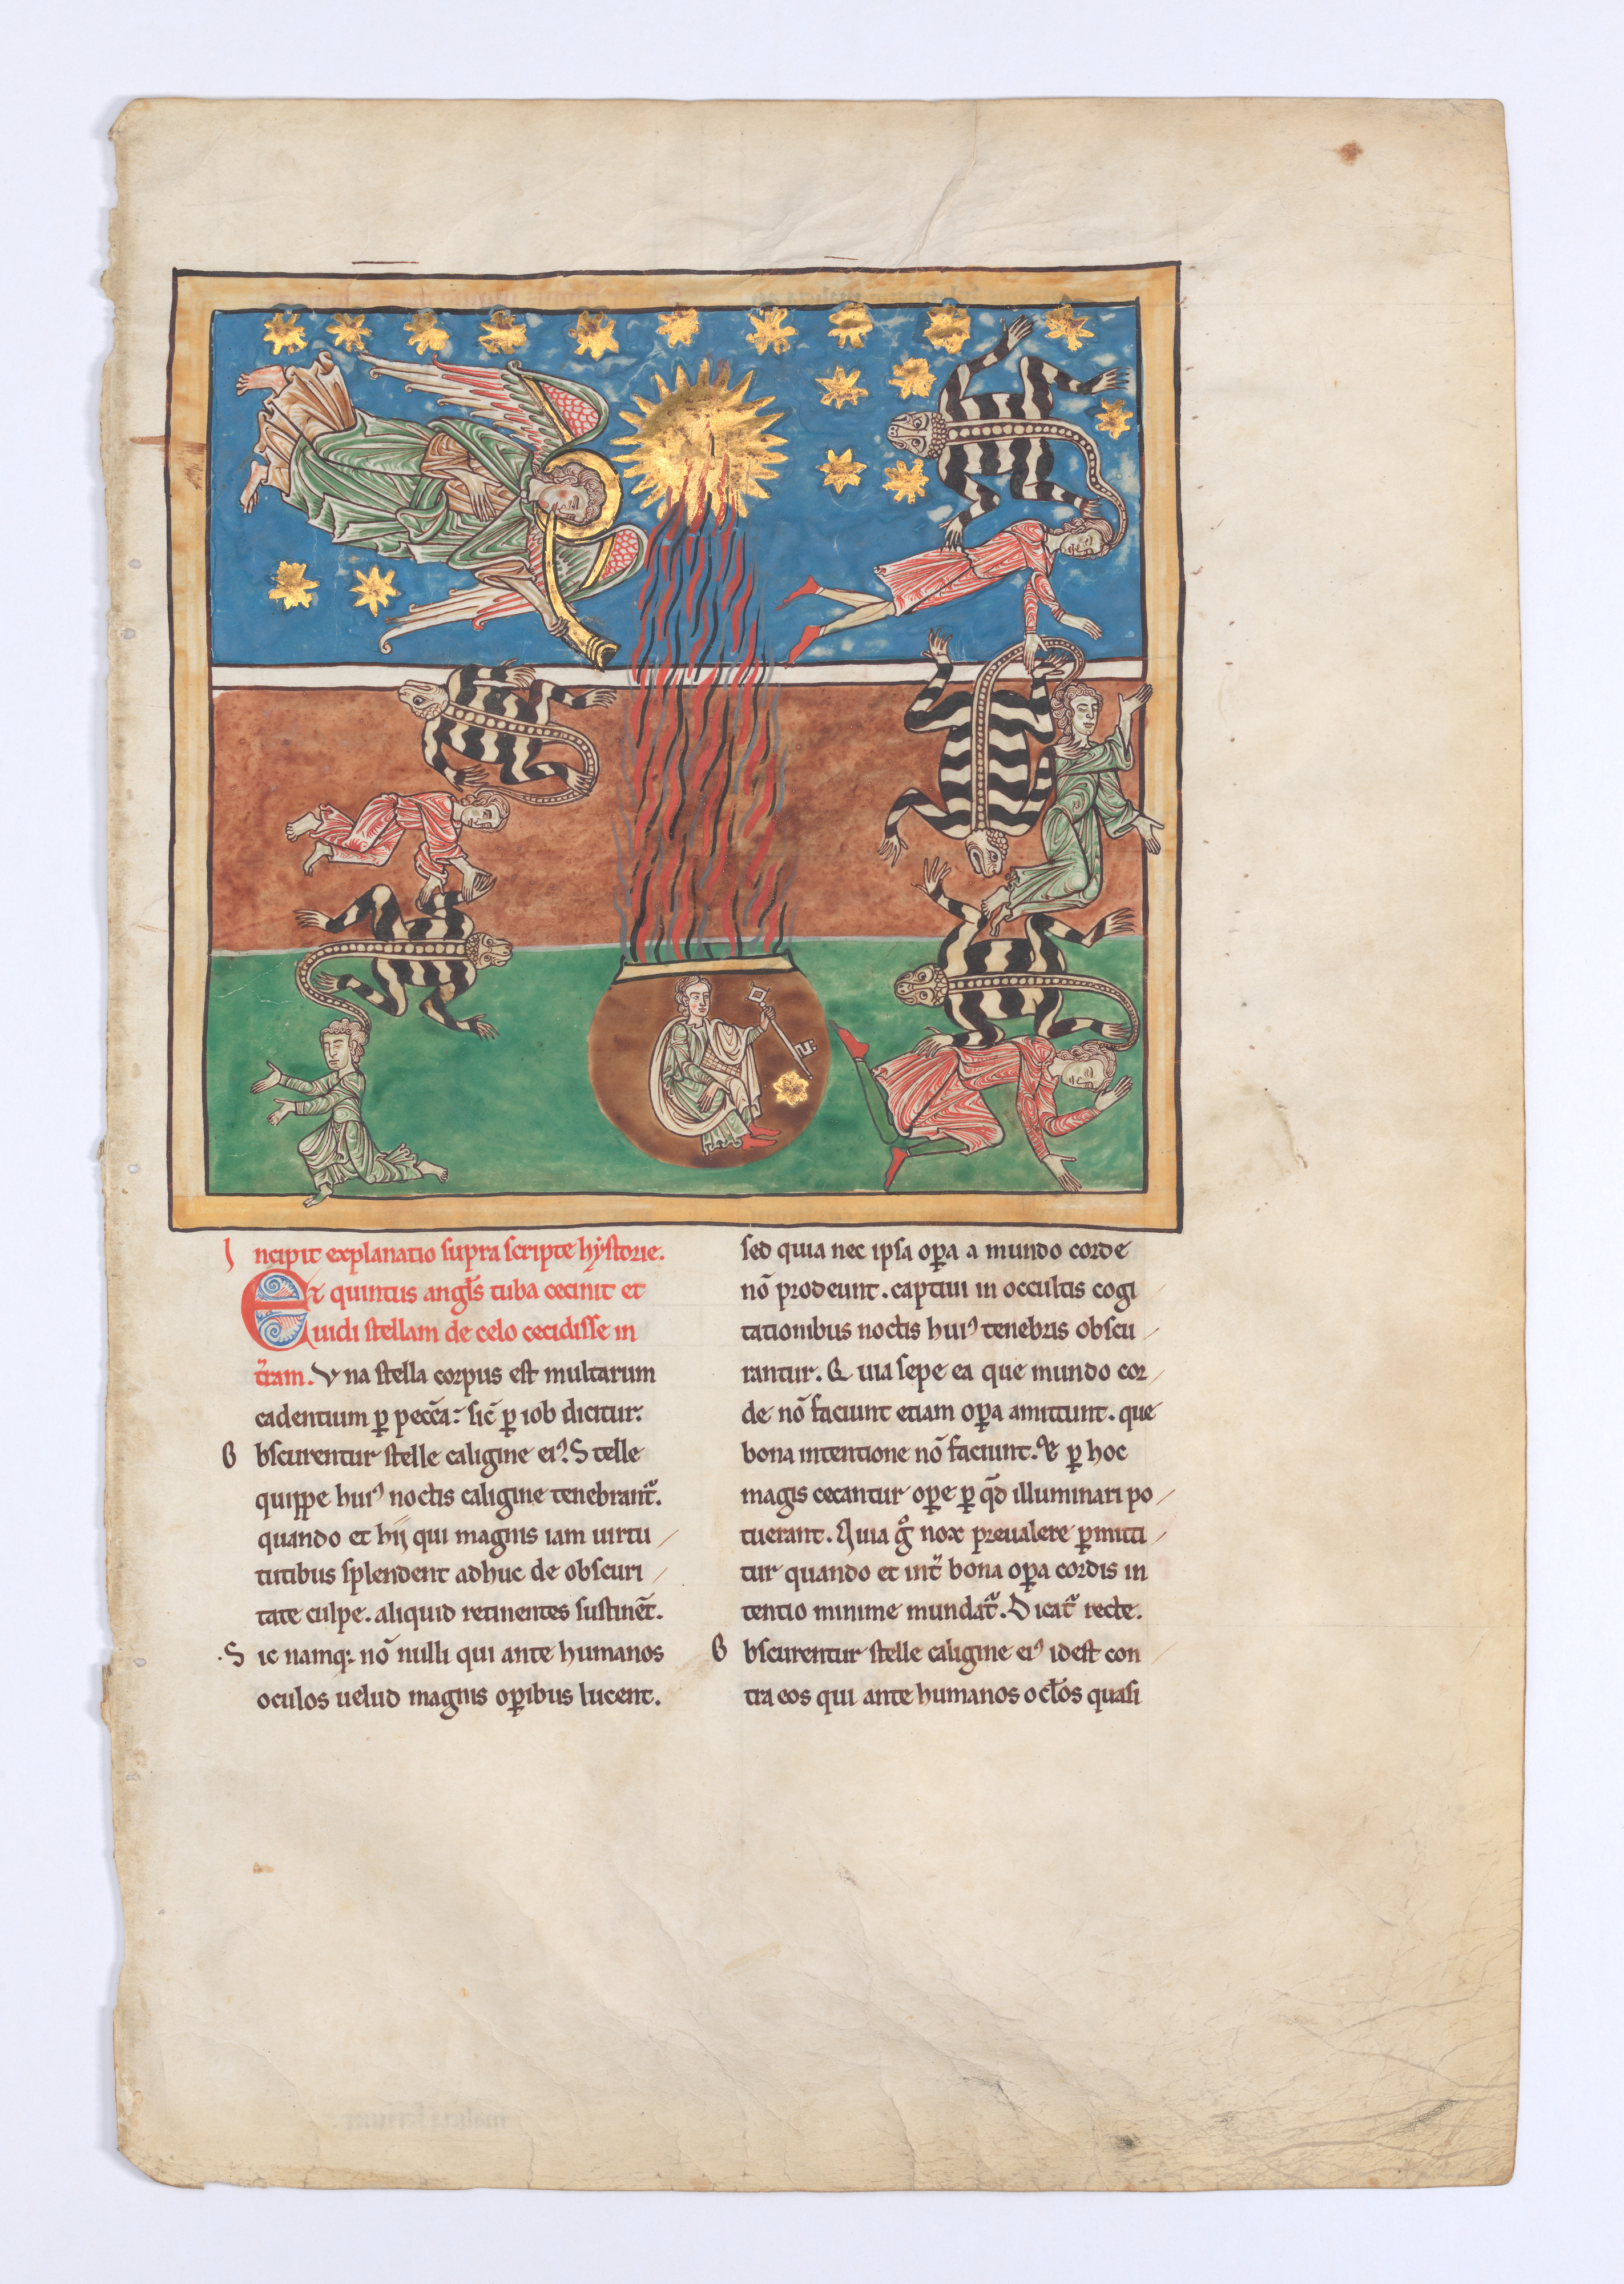 Leaf from a Beatus Manuscript: at the Clarion of the Fifth Angel's Trumpet,  a Star Falls from the Sky; the Bottomless Pit is Opened with a Key;  Emerging from the Smoke, Locusts